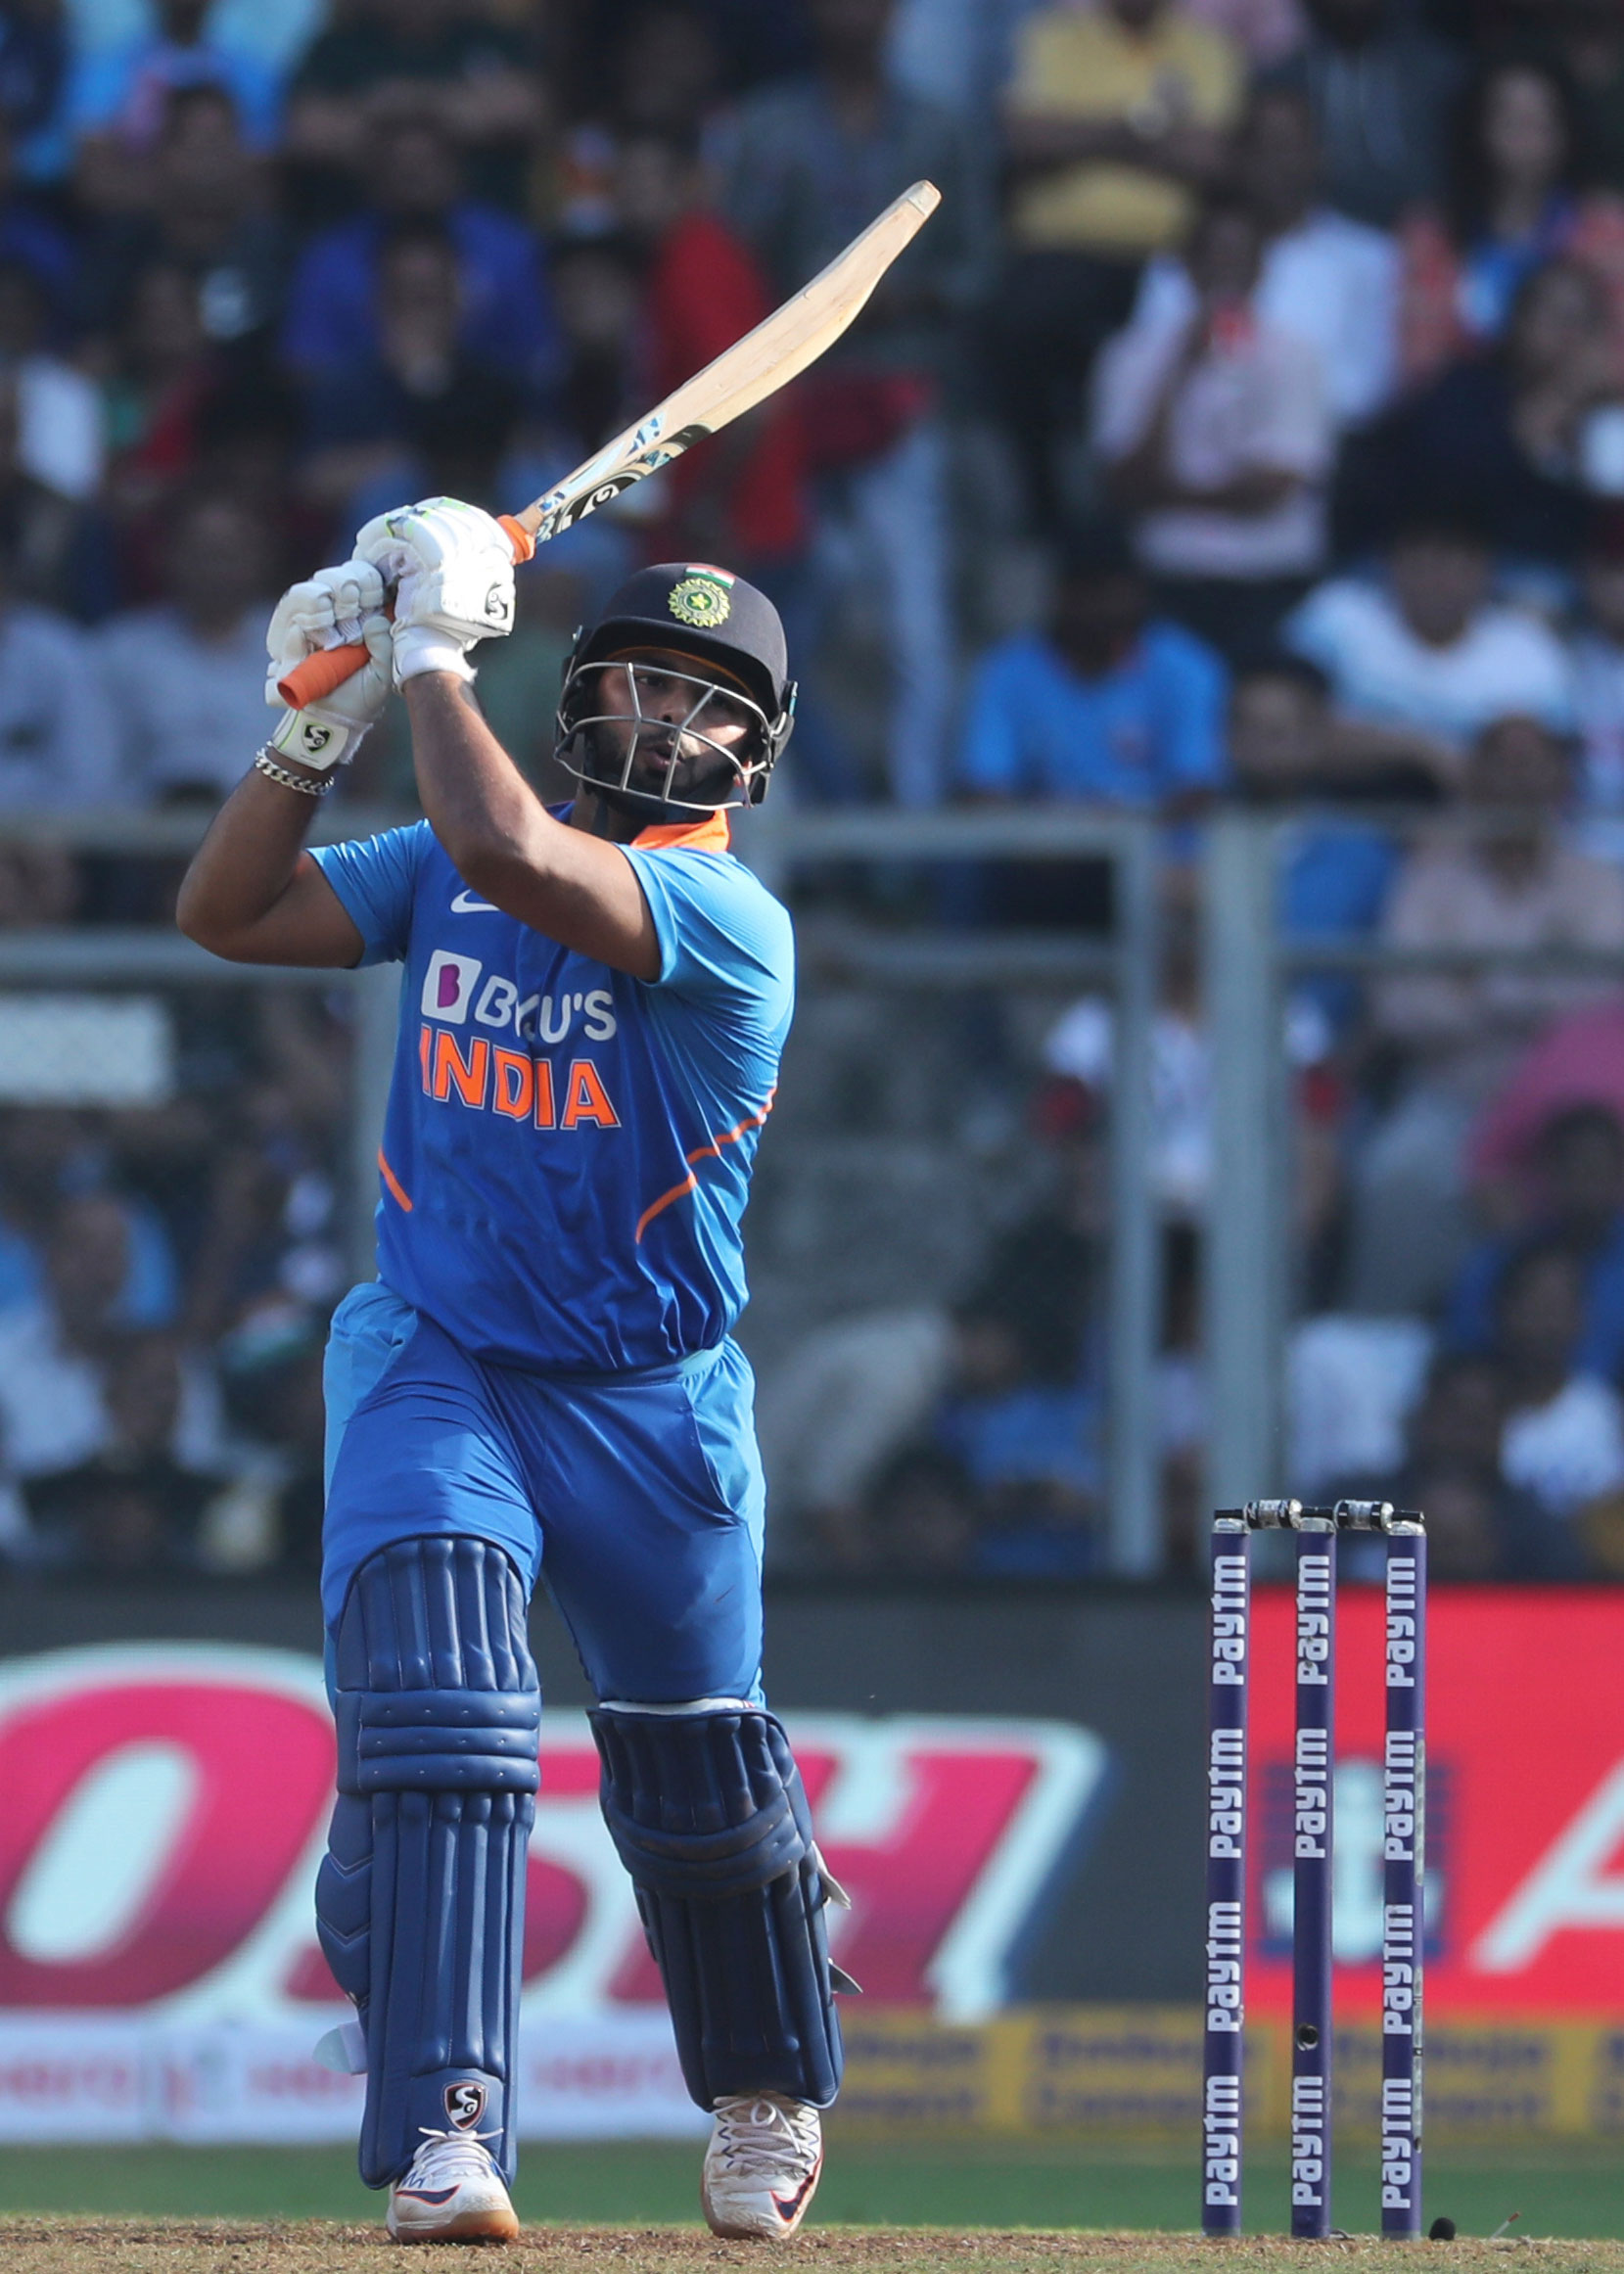 India's Rishabh Pant bats during the first one-day international cricket match between India and Australia in Mumbai, India on Tuesday